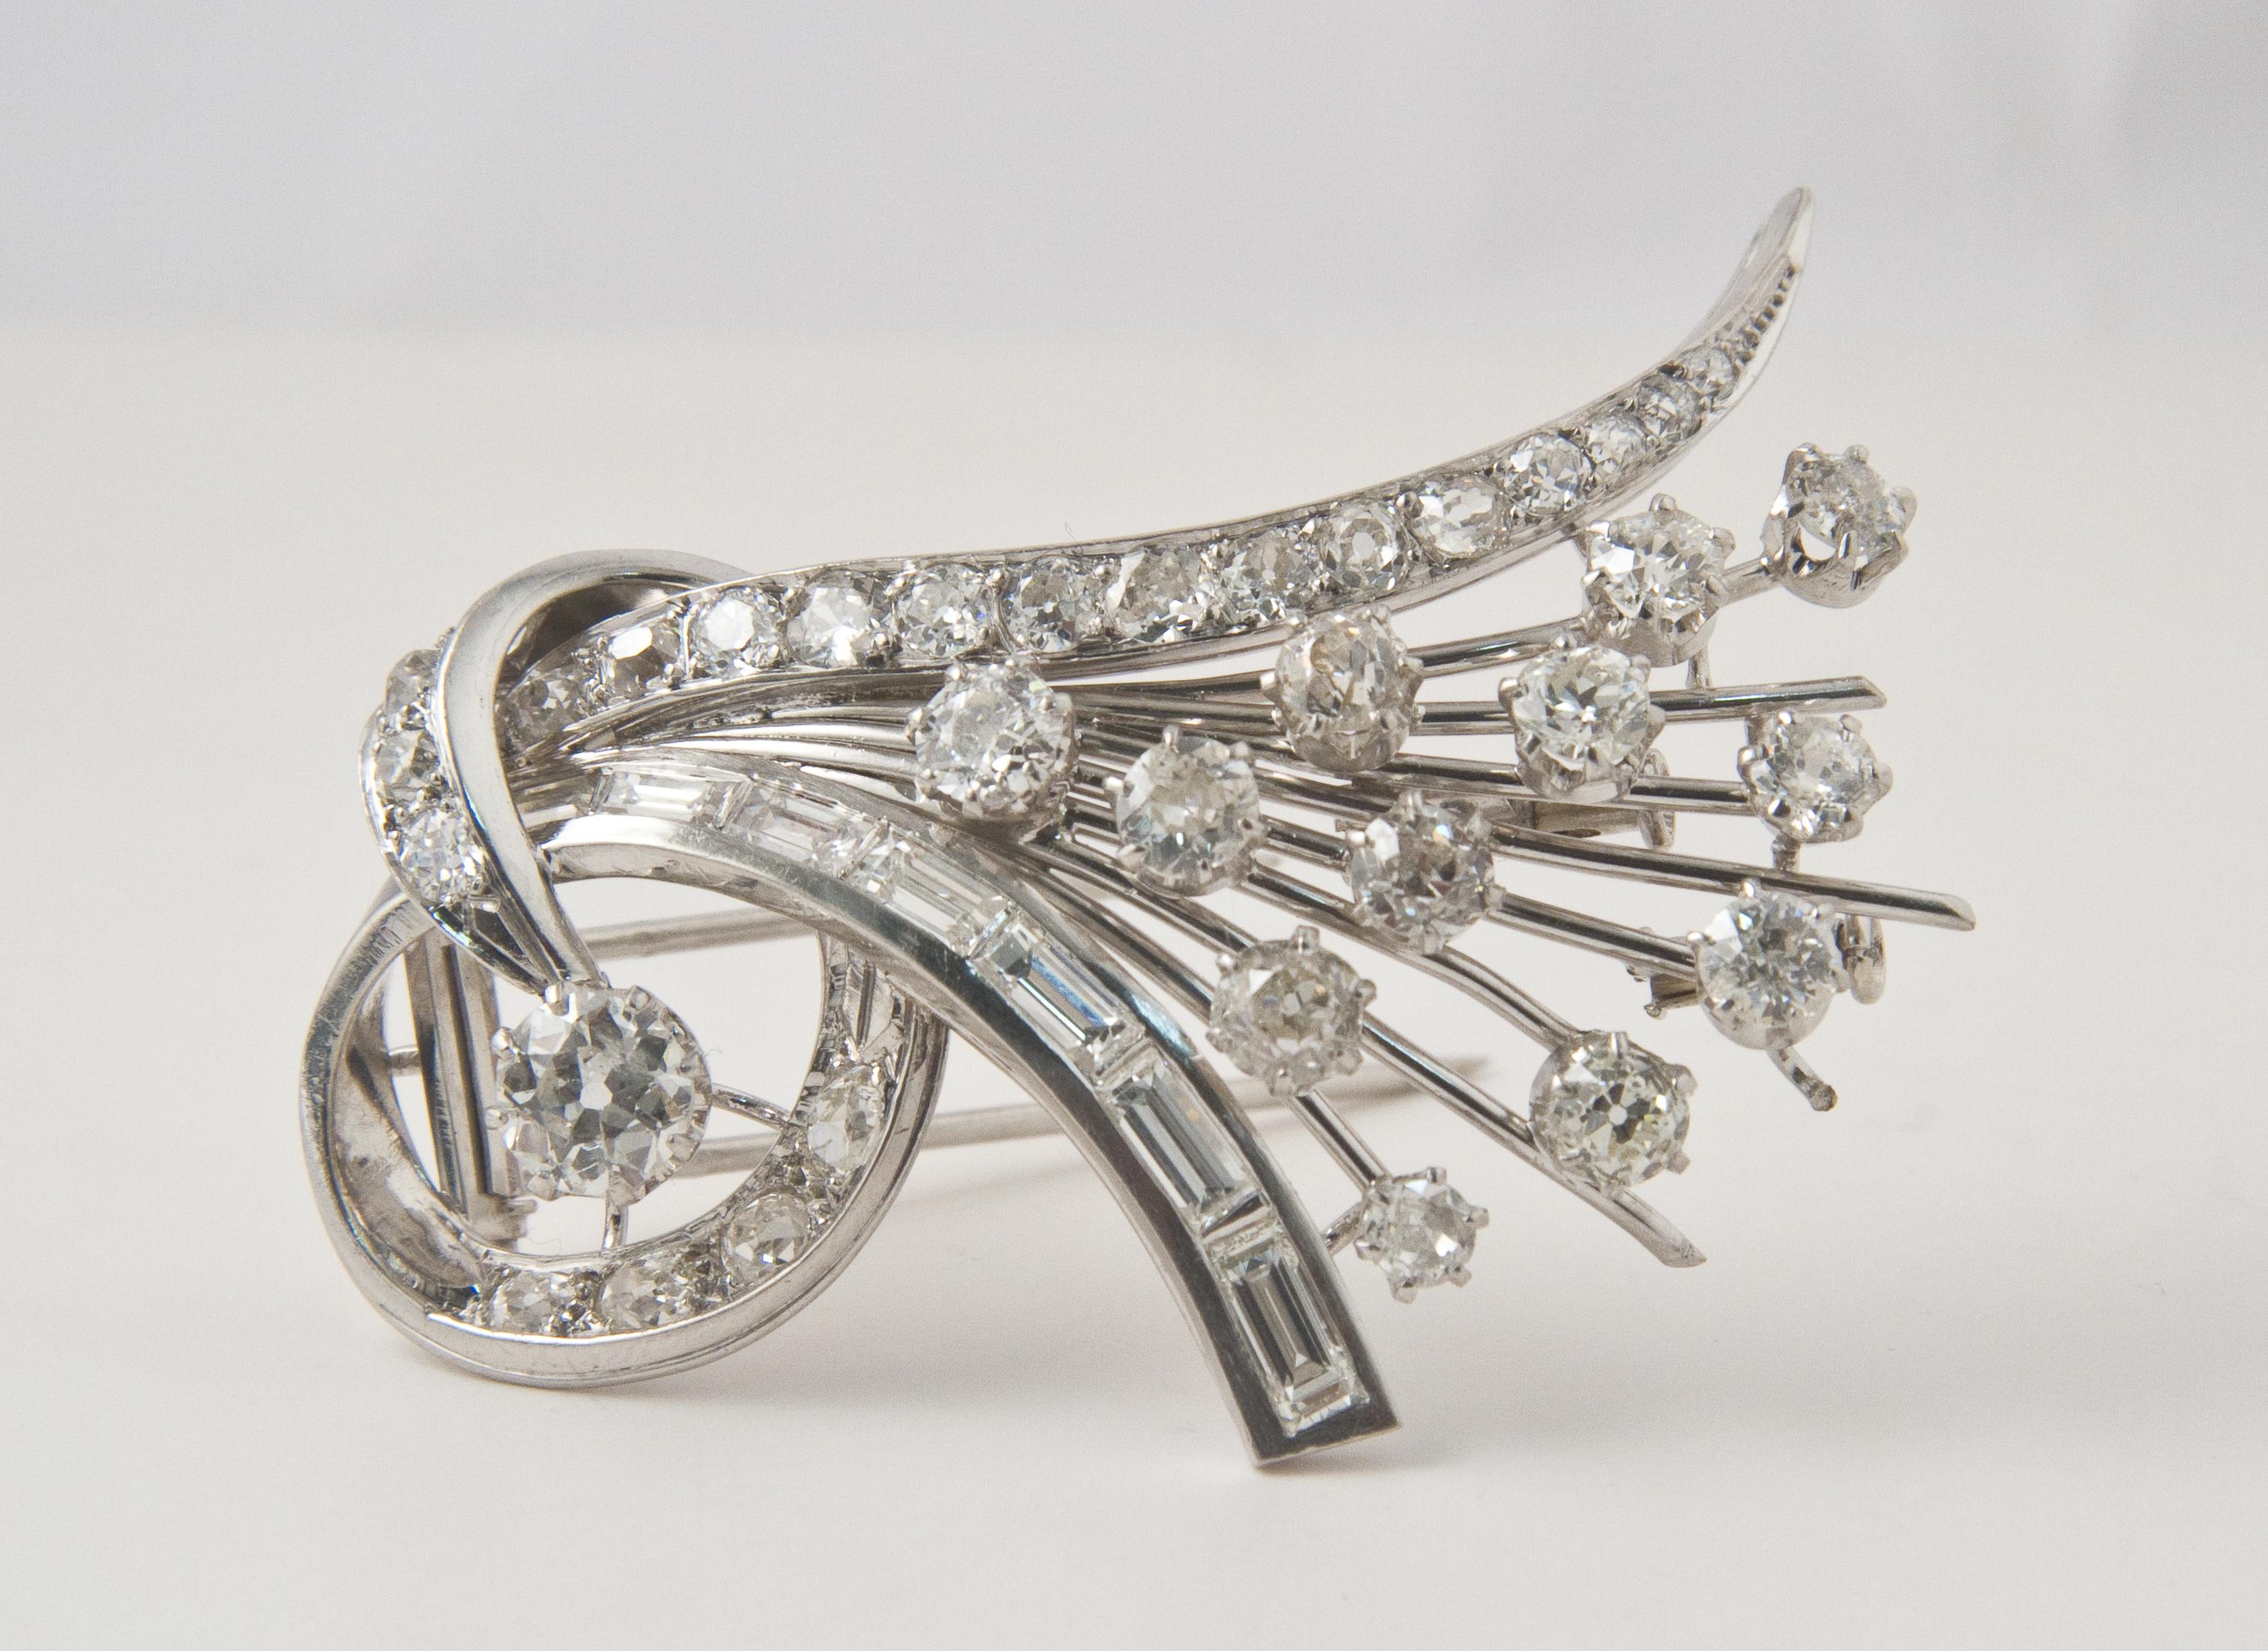 Discover an extraordinary piece of jewellery: a magnificent platinum brooch in the shape of a bouquet of flowers, designed to captivate the eye. This exceptional brooch is adorned with 41 sparkling diamonds, adding a touch of glamour and elegance to